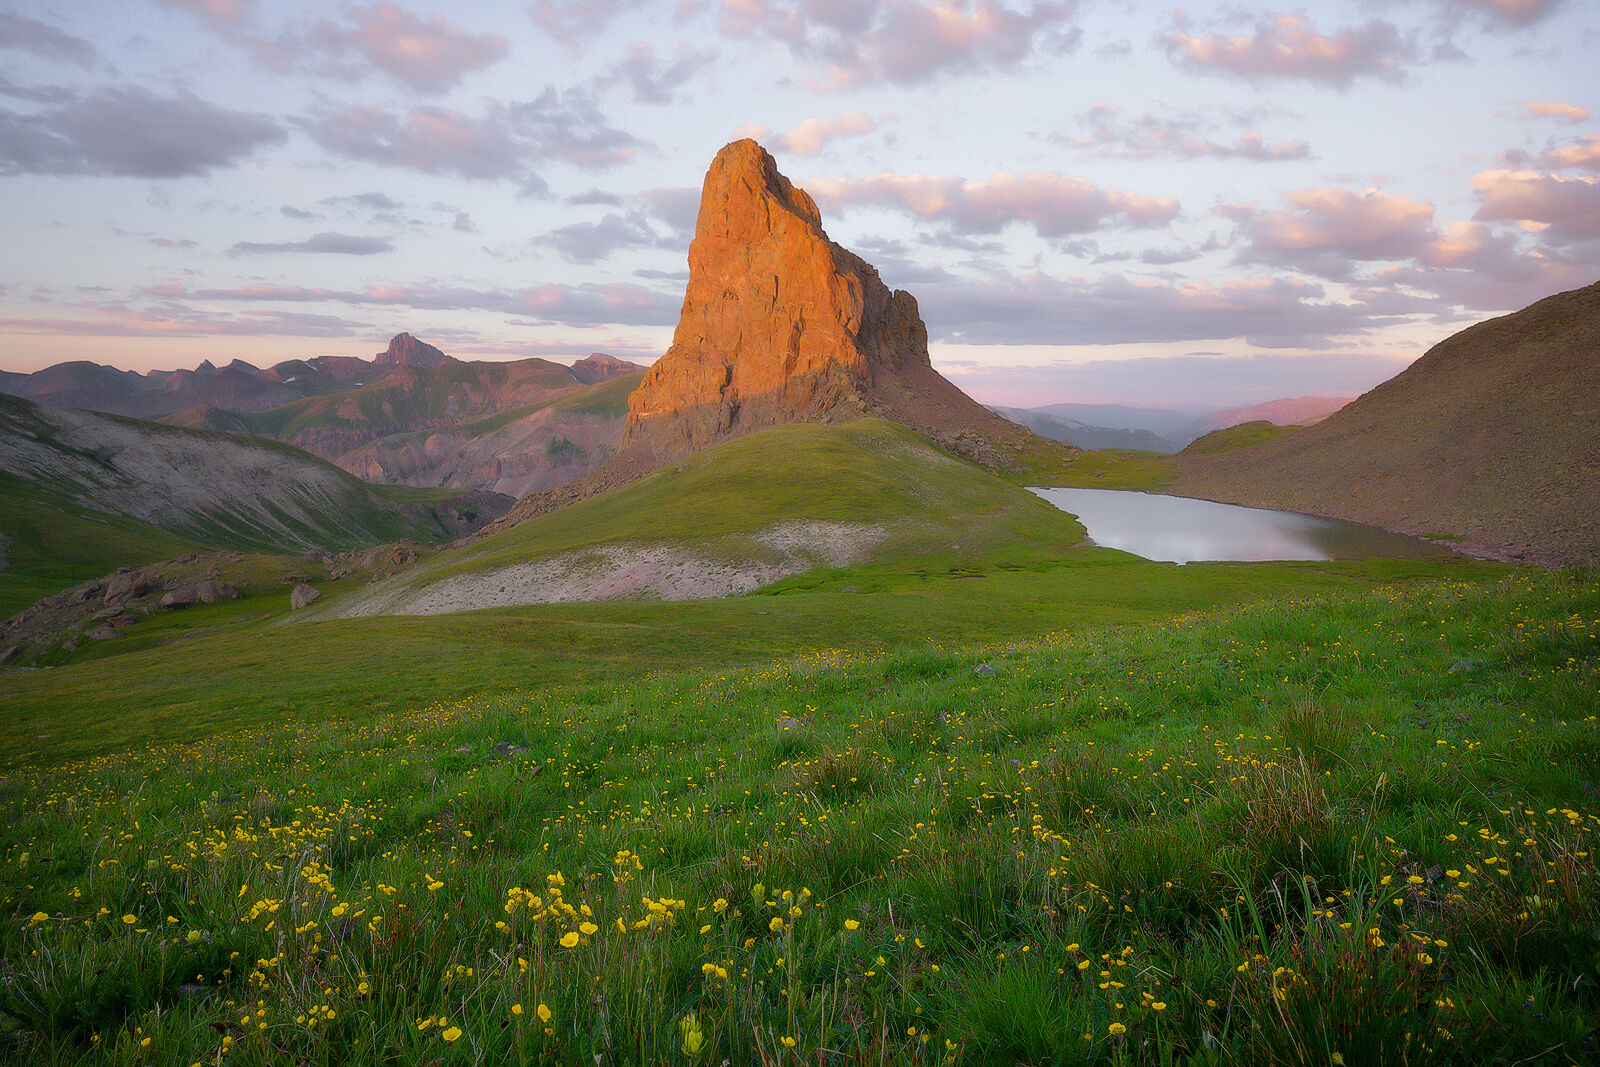 Mountain peak stands solo surrounded by a meadow of green grass and a mountain range in the background and a small lake. All while the sun sets a pink sky